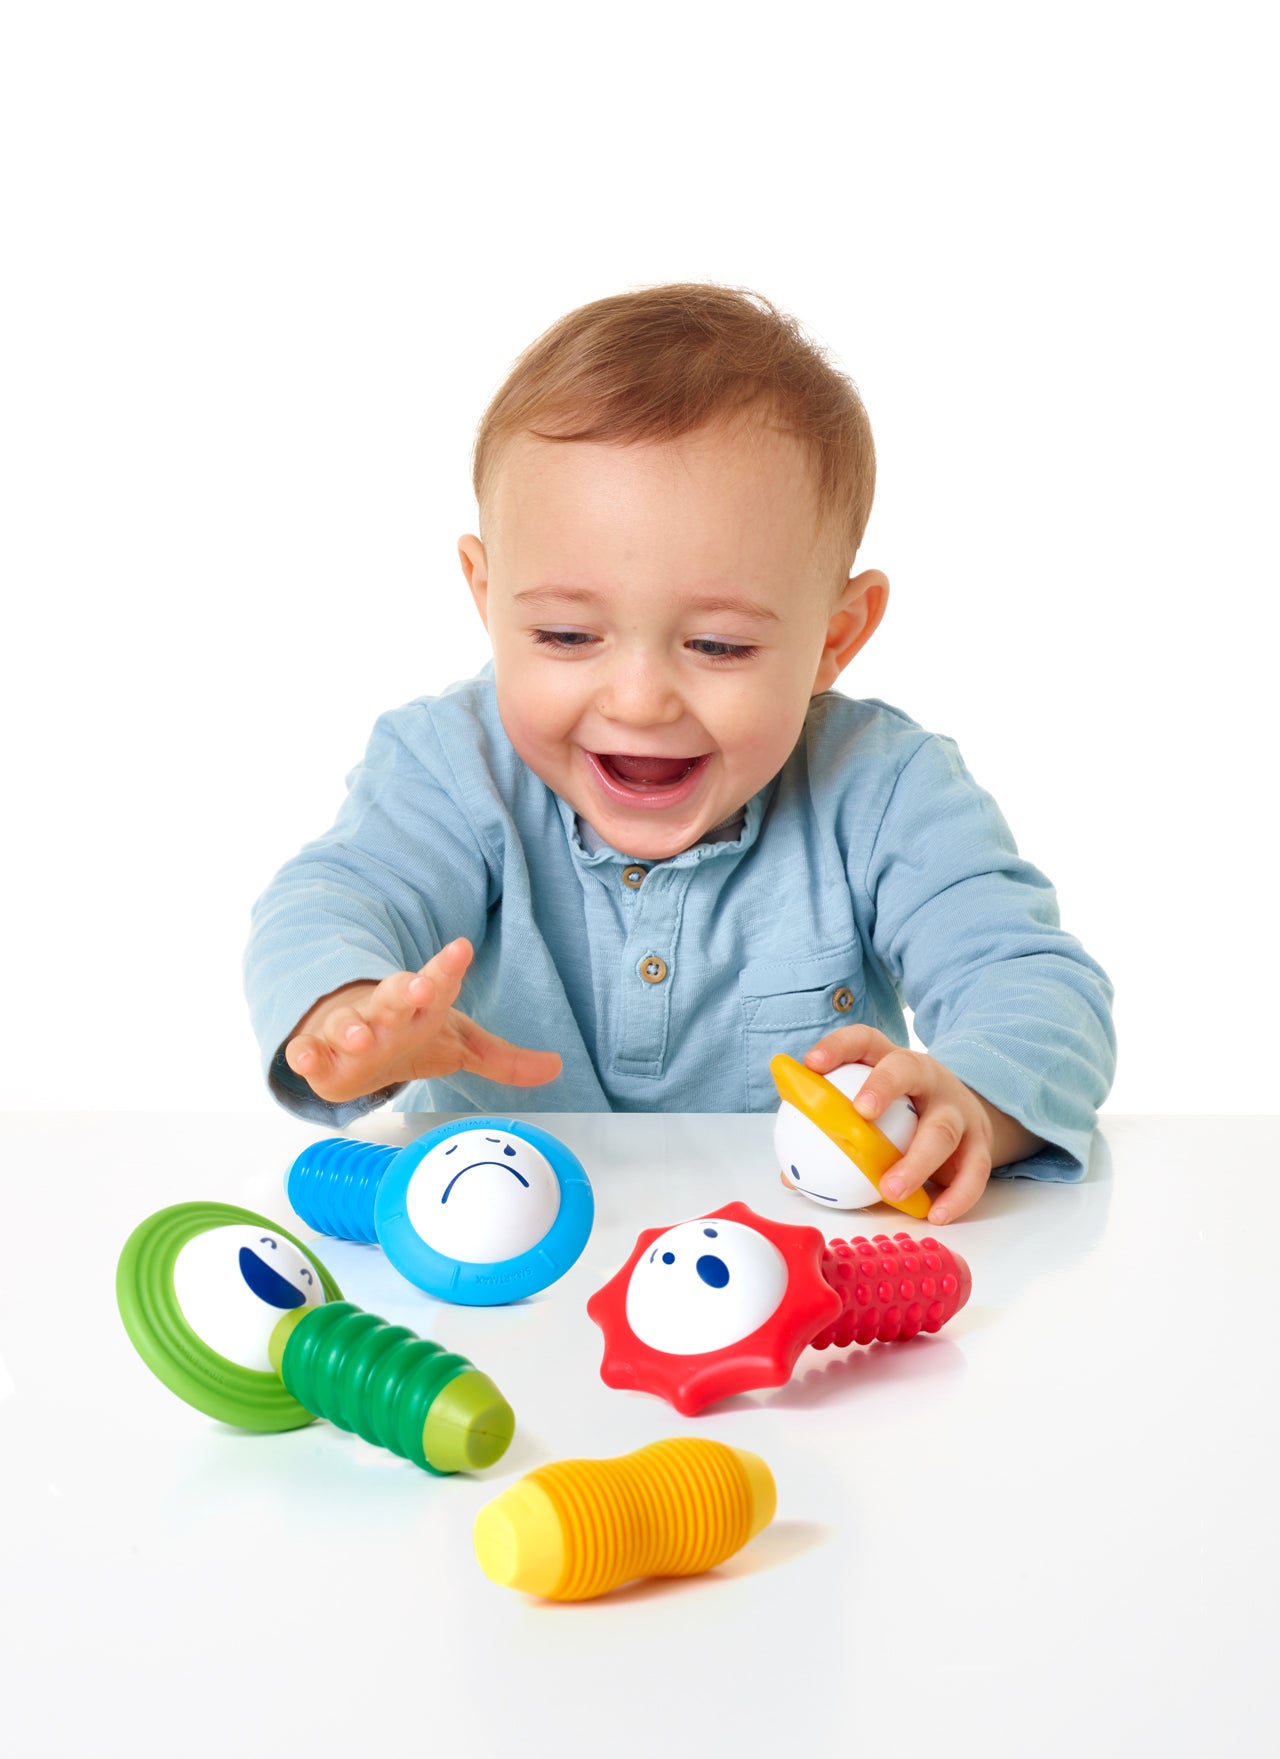 SmartMax Discovery: My First Sound & Senses - Taylorson